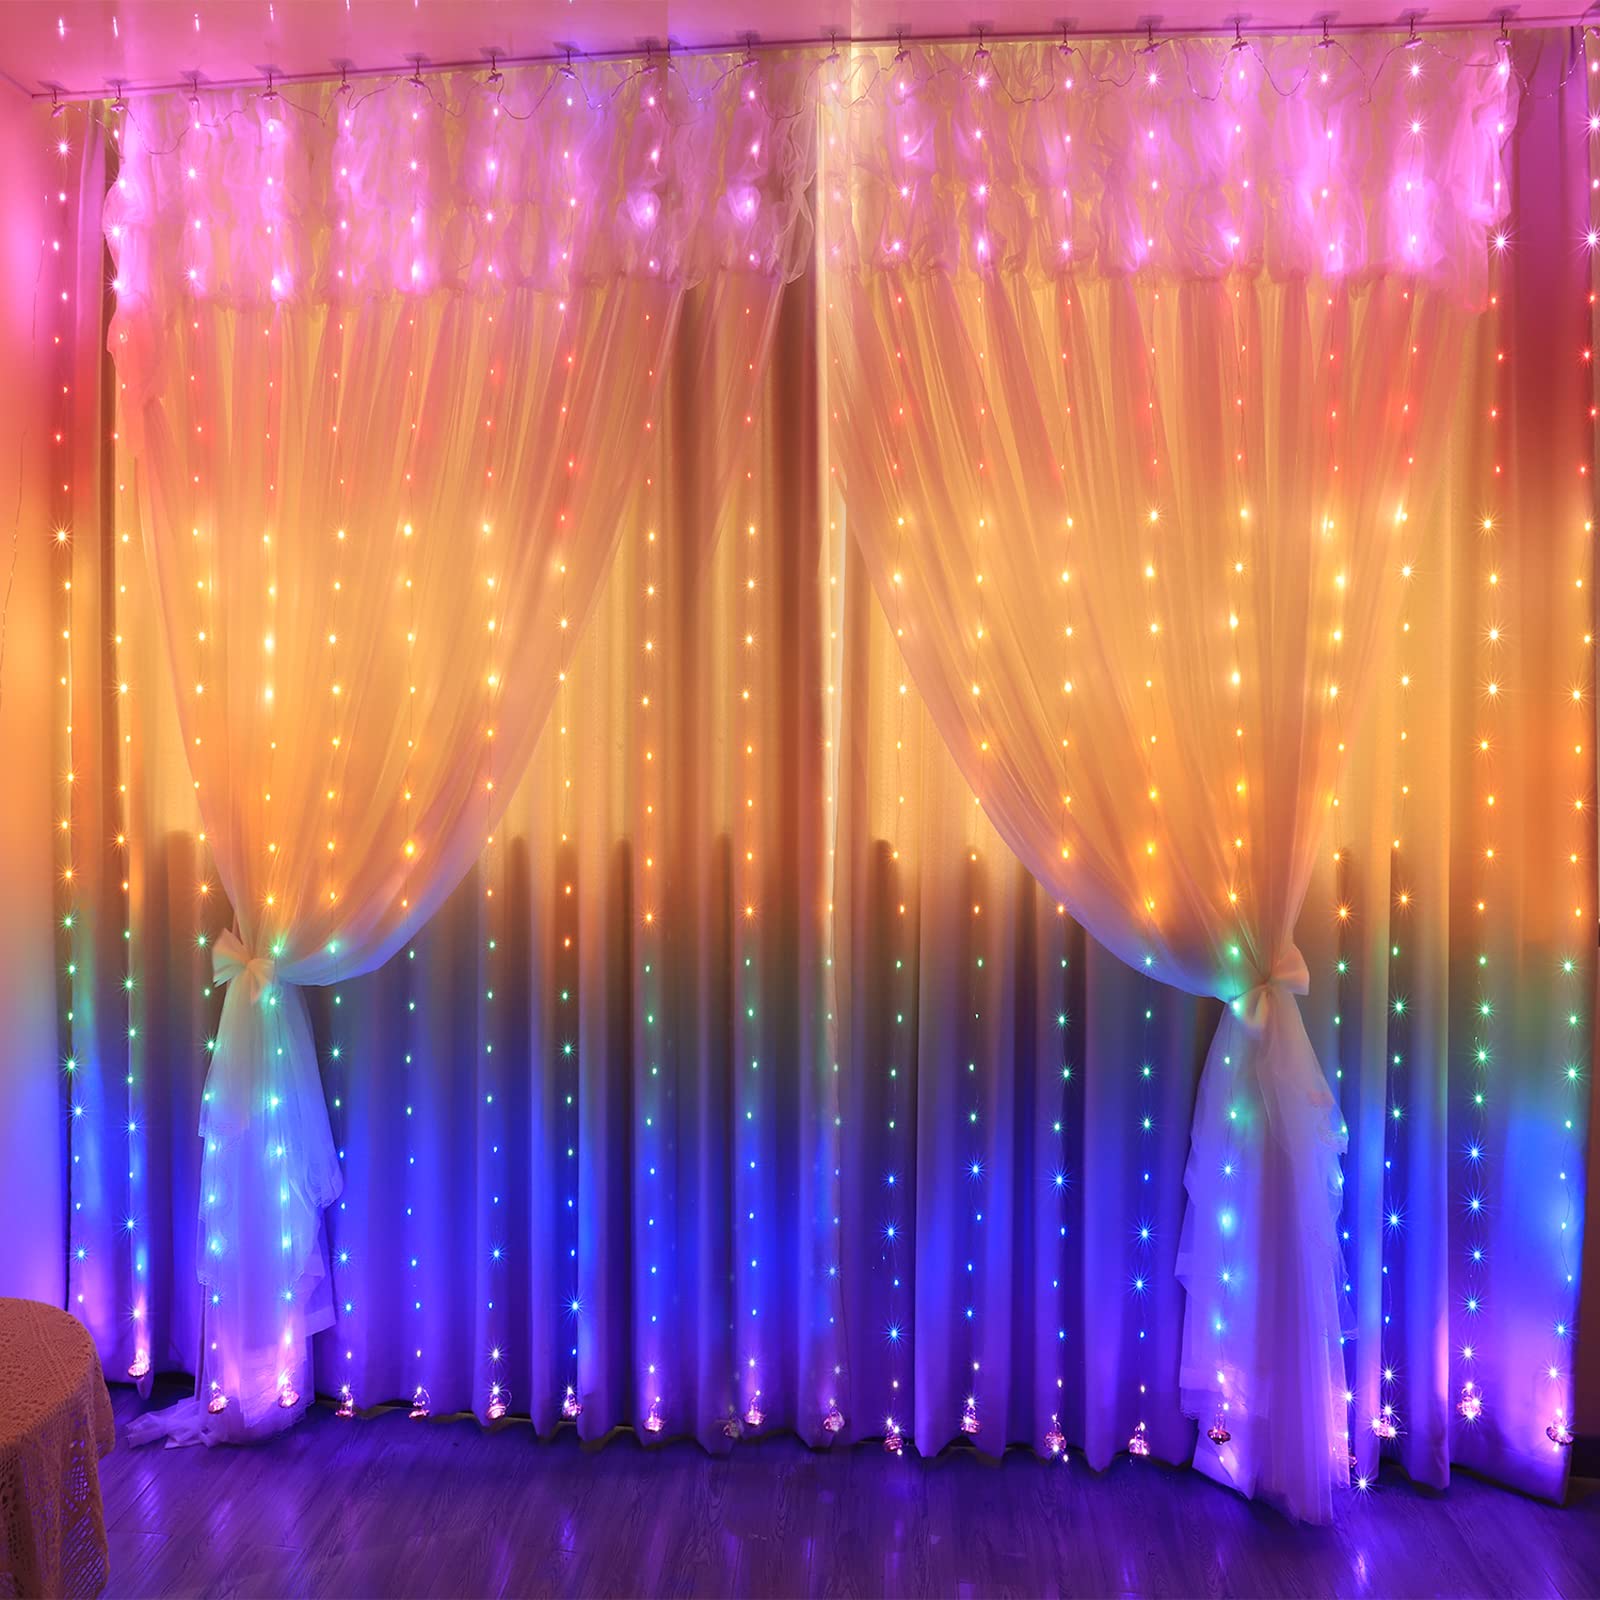 AIGUMI Curtain Fairy String Lights 280 LED, 3mx2.8m USB Window Lights with Hook, 8 Modes Remote Control Curtain Lights for Indoor Outdoor Wedding Party Christmas Bedroom Gazebo Decorations